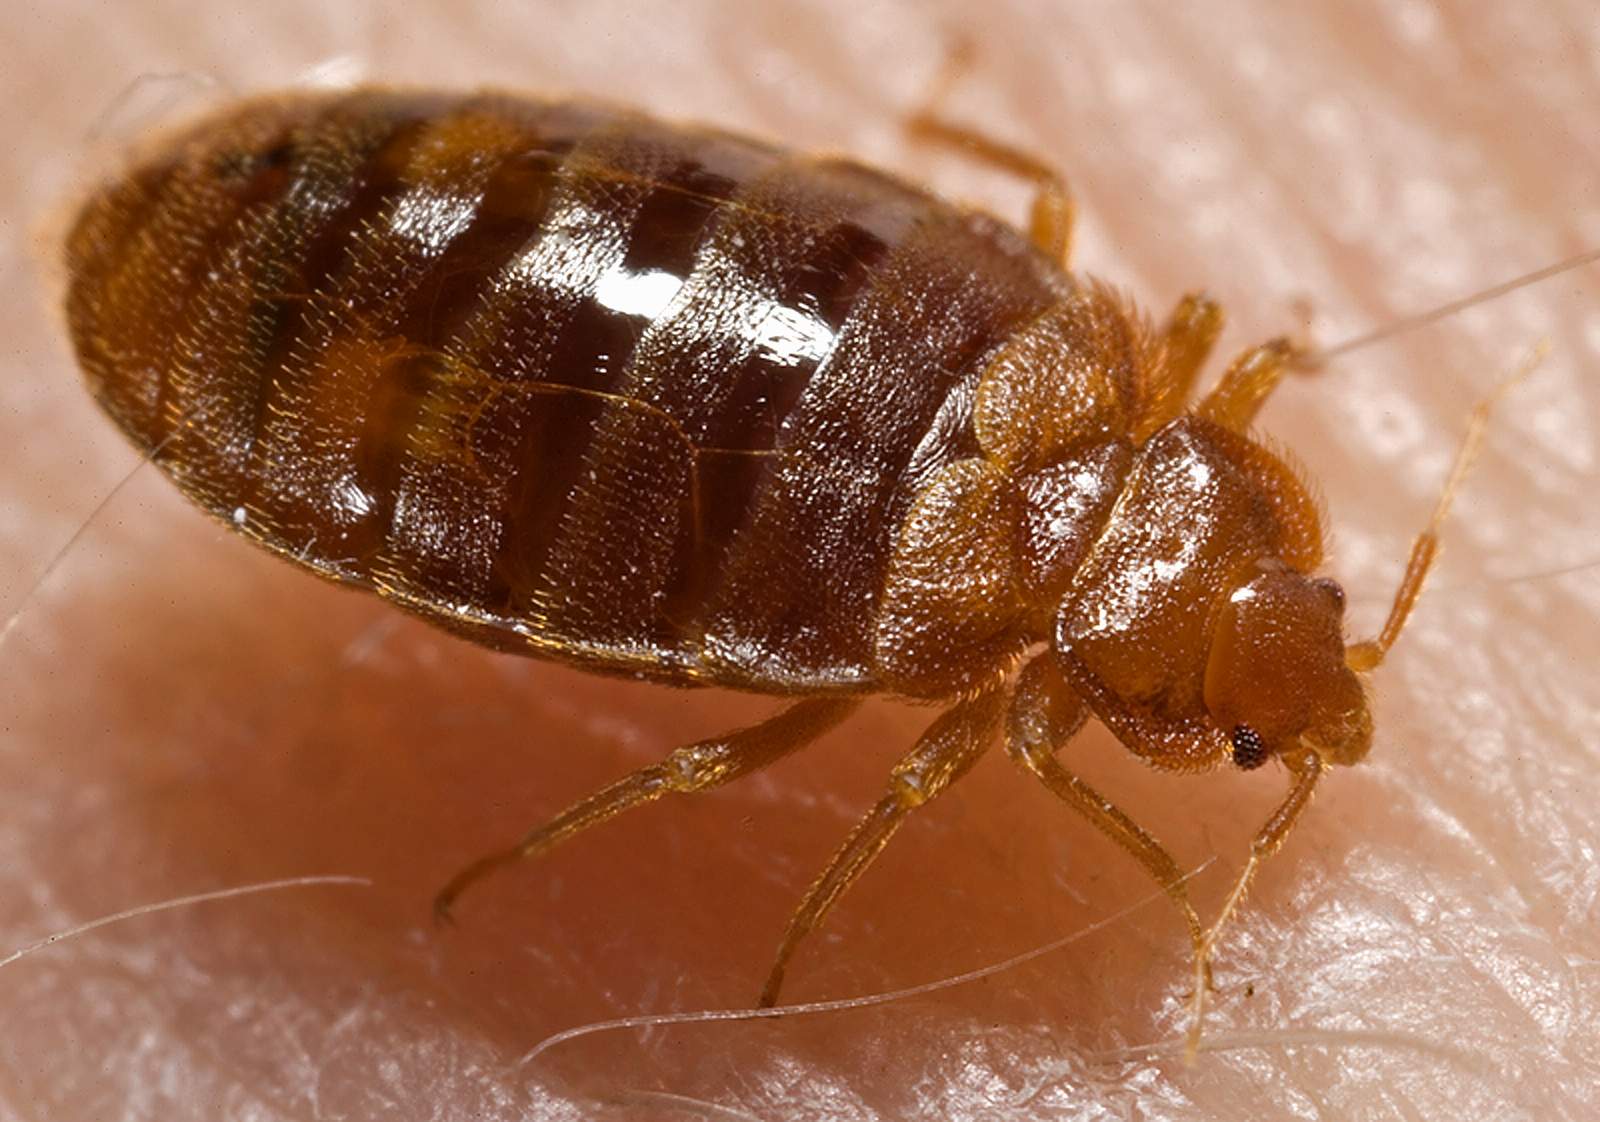 A bed bug nymph (Cimex lectularius) as it was in the process of ingesting a blood meal from the arm of a “voluntary” human host